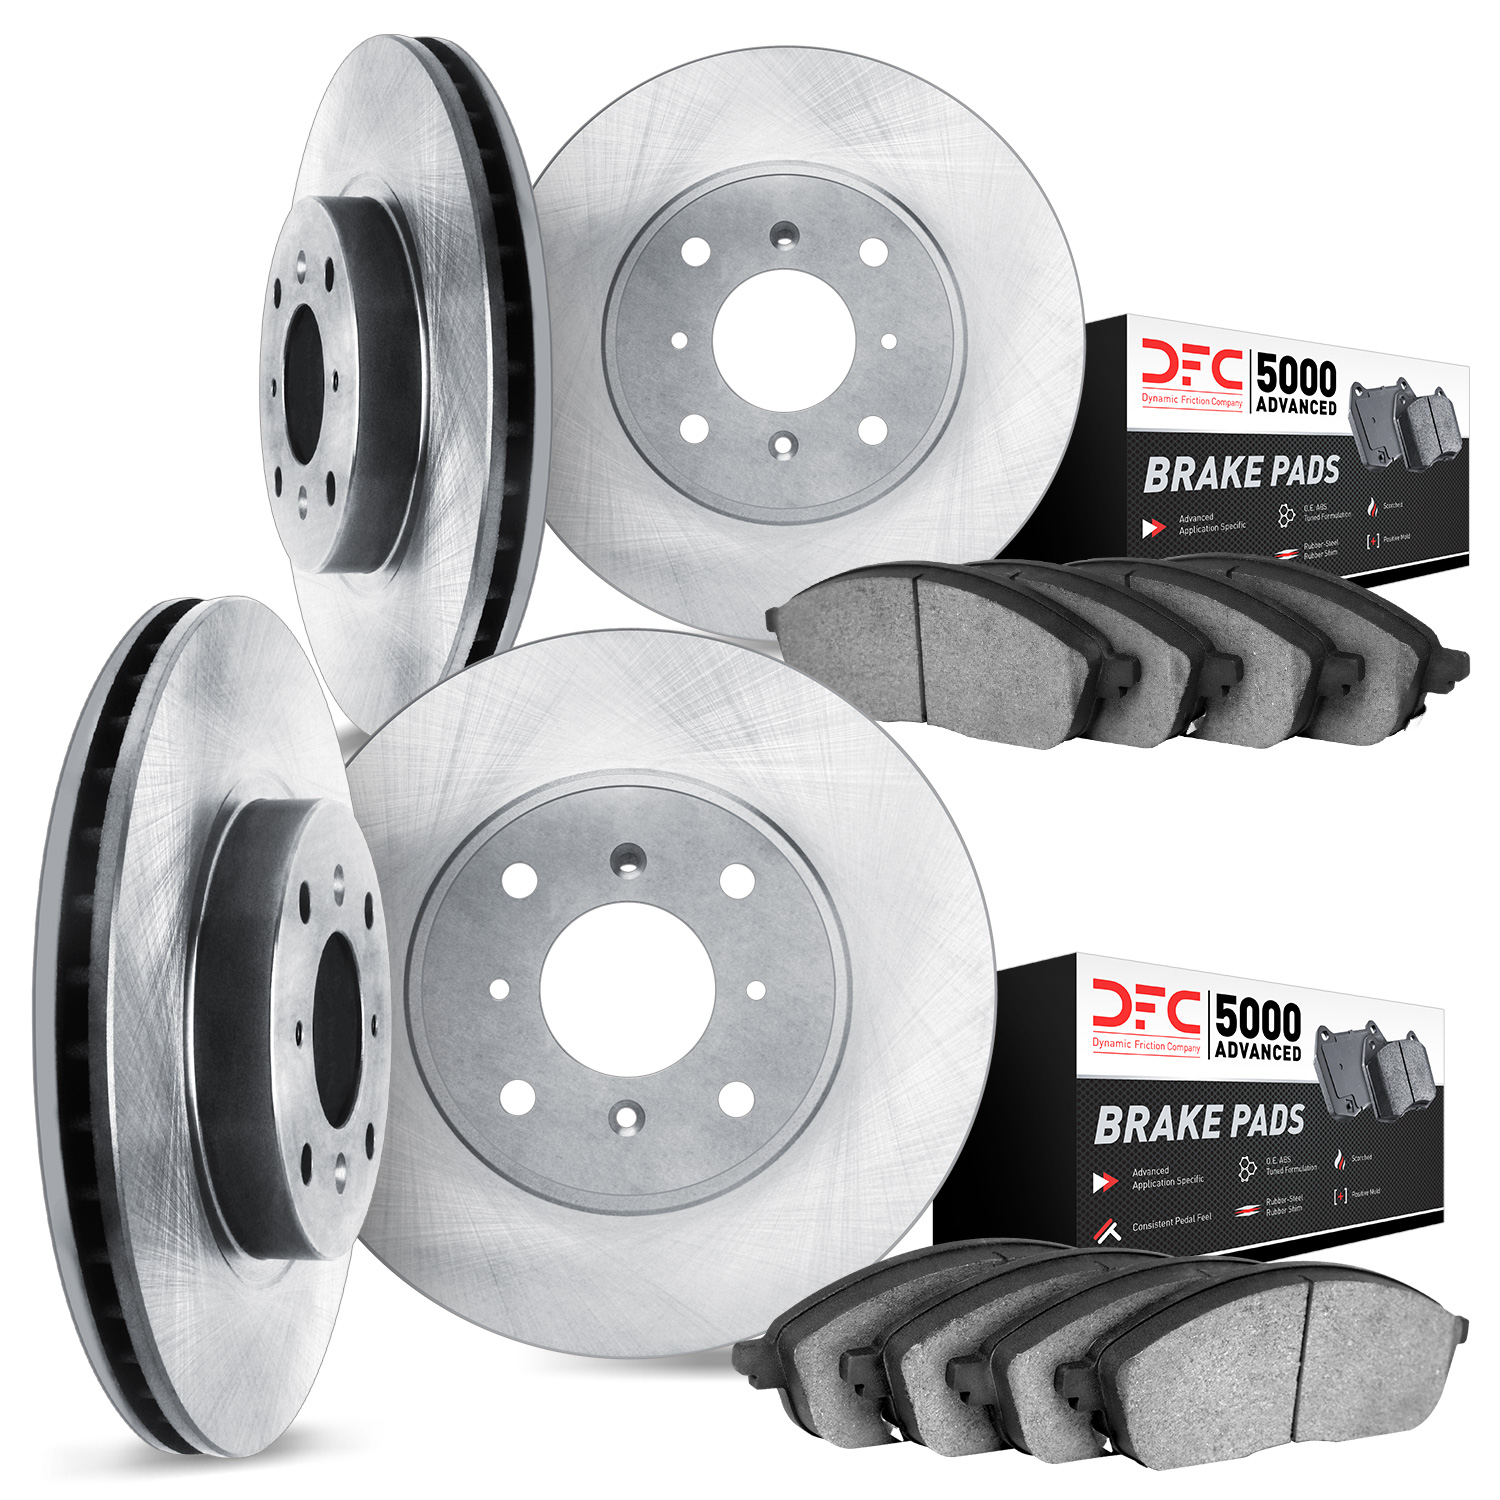 6504-56096 Brake Rotors w/5000 Advanced Brake Pads Kit, 1998-2000 Ford/Lincoln/Mercury/Mazda, Position: Front and Rear